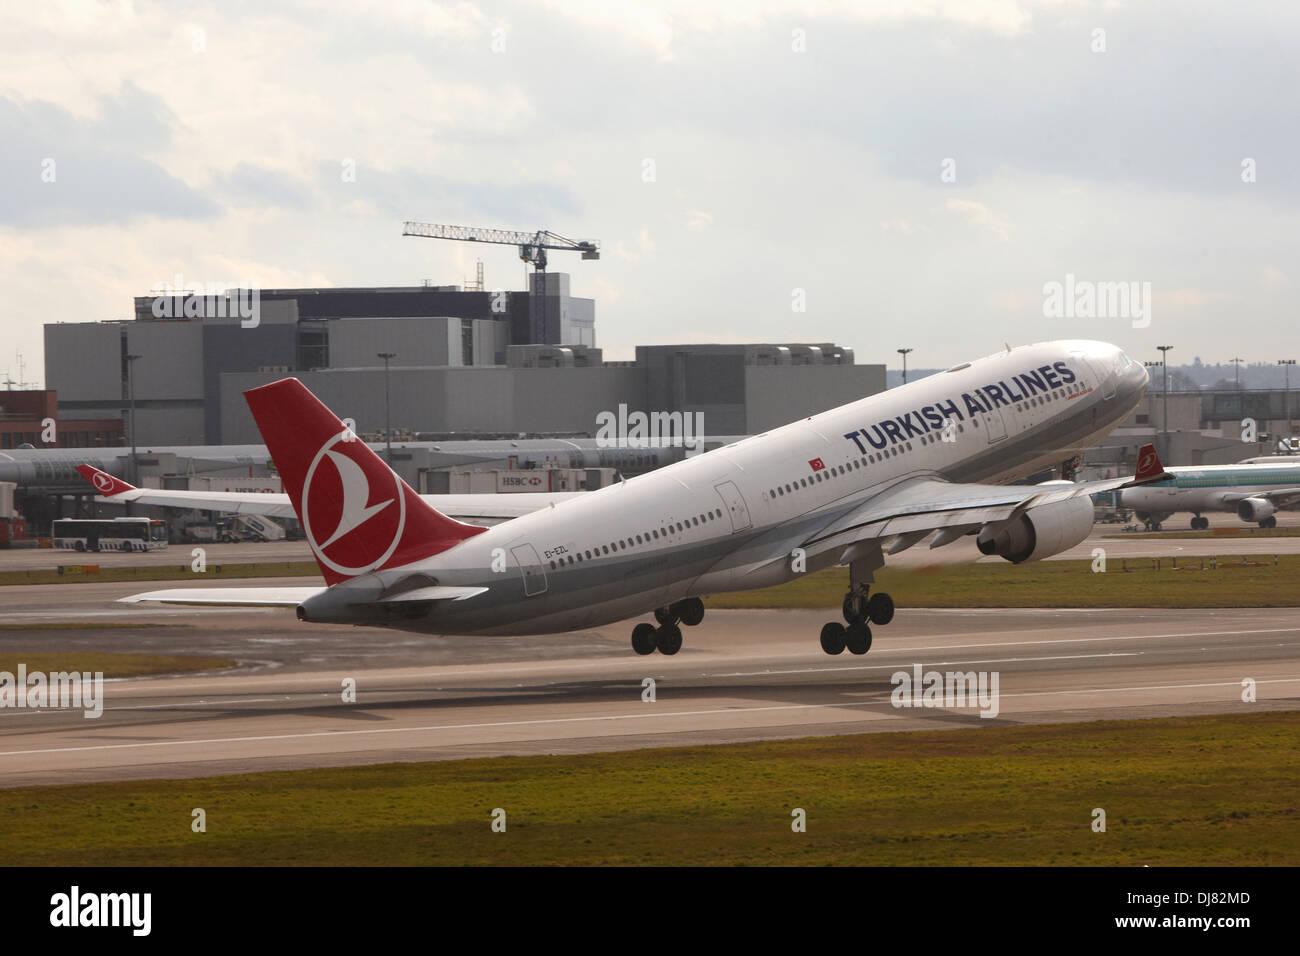 Turkish Airlines Airbus A330 taking off at London Heathrow Airport Stock Photo